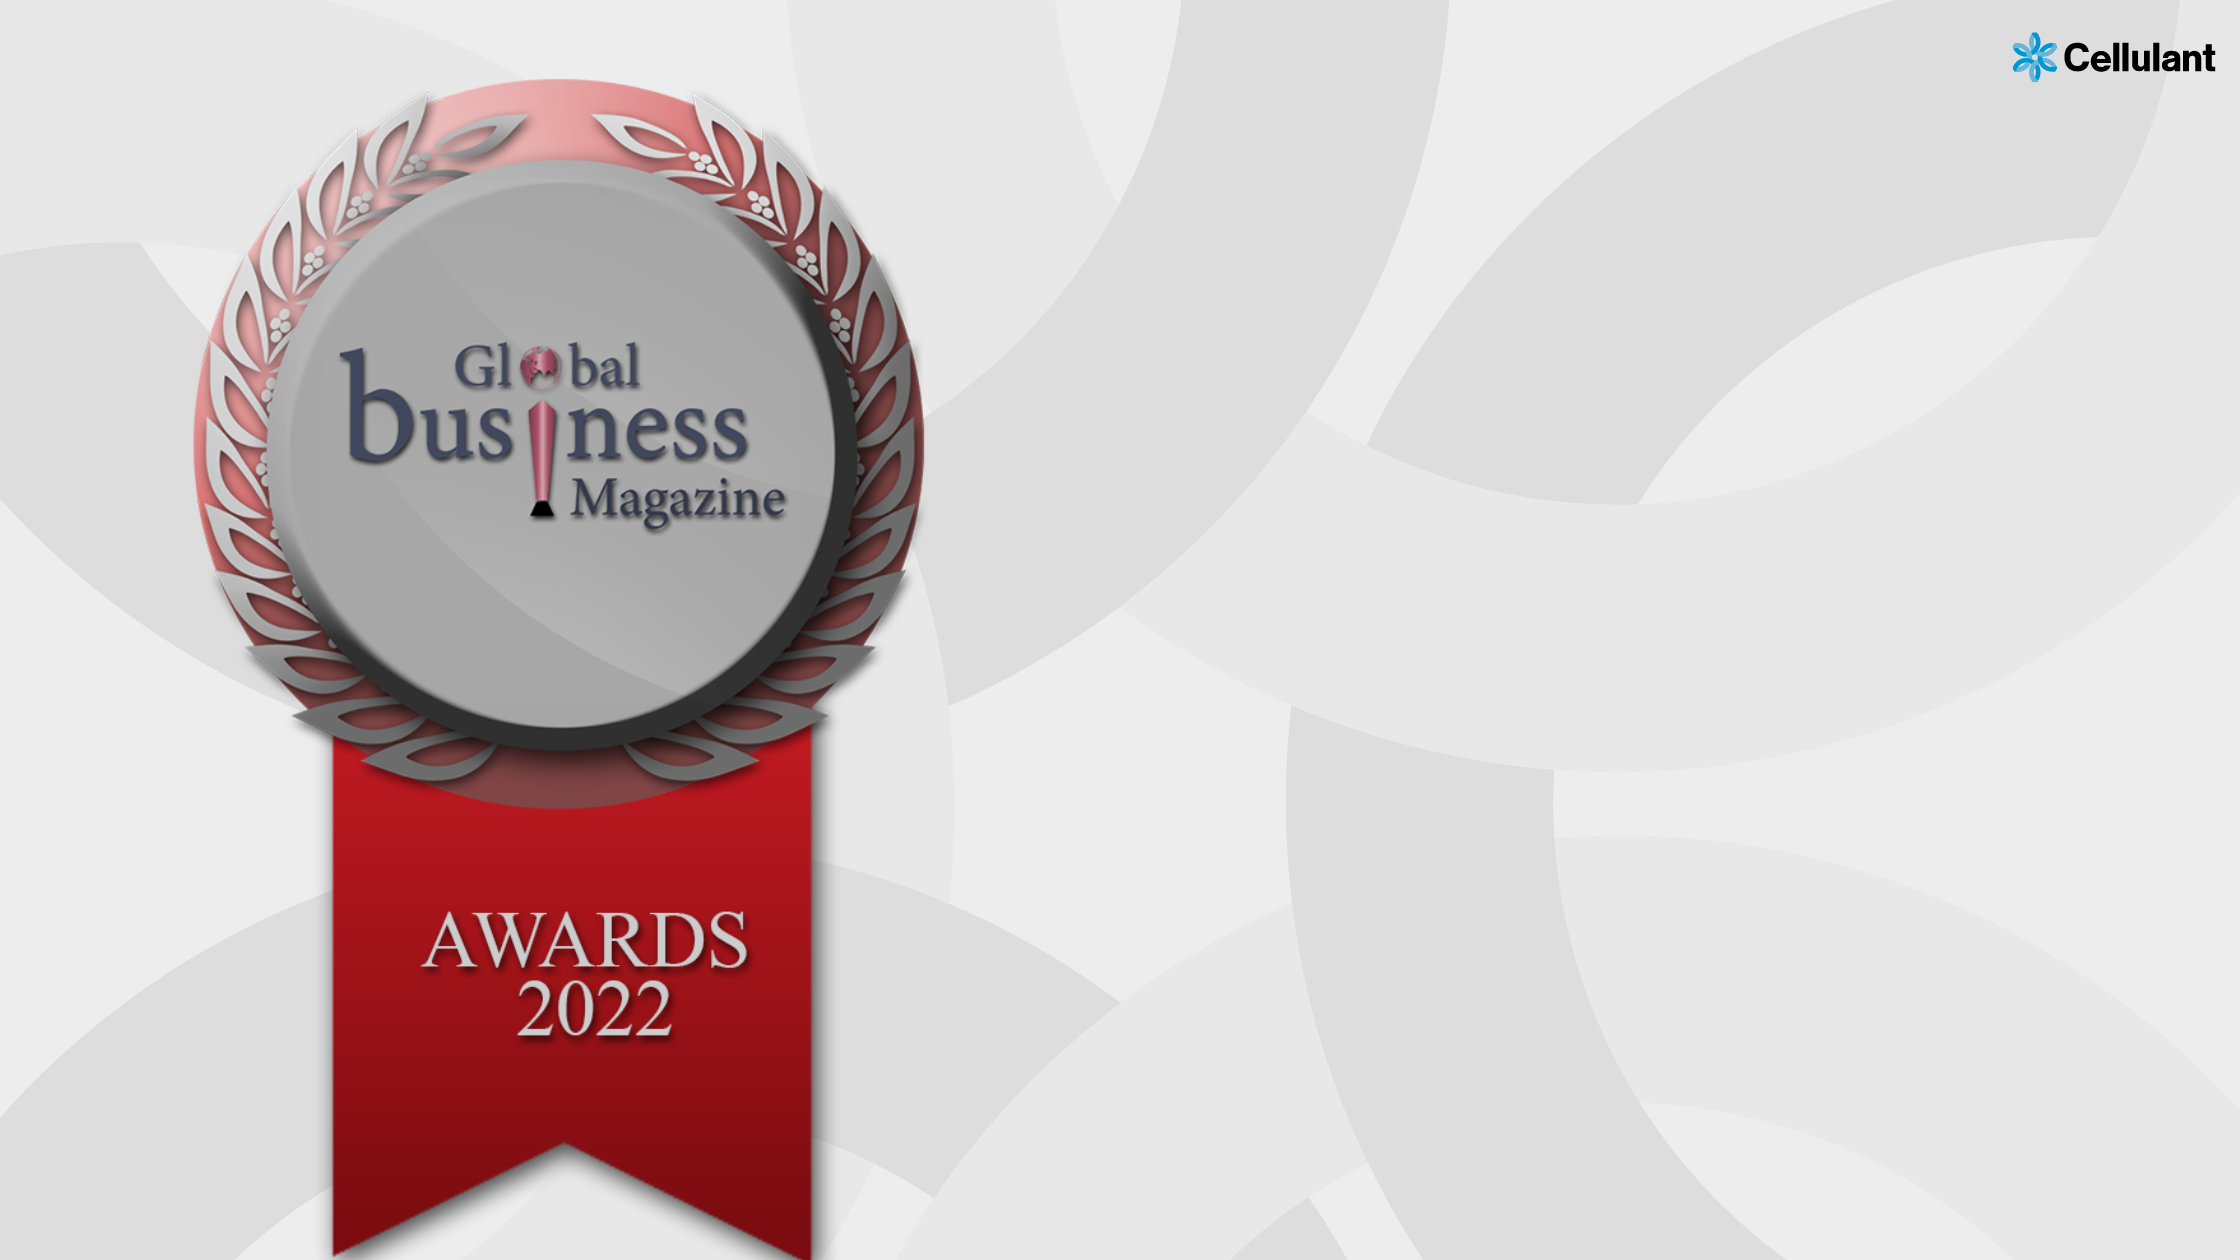 Cellulant Recognized for its Payments Platform at the 2022 Global Business Magazine Awards